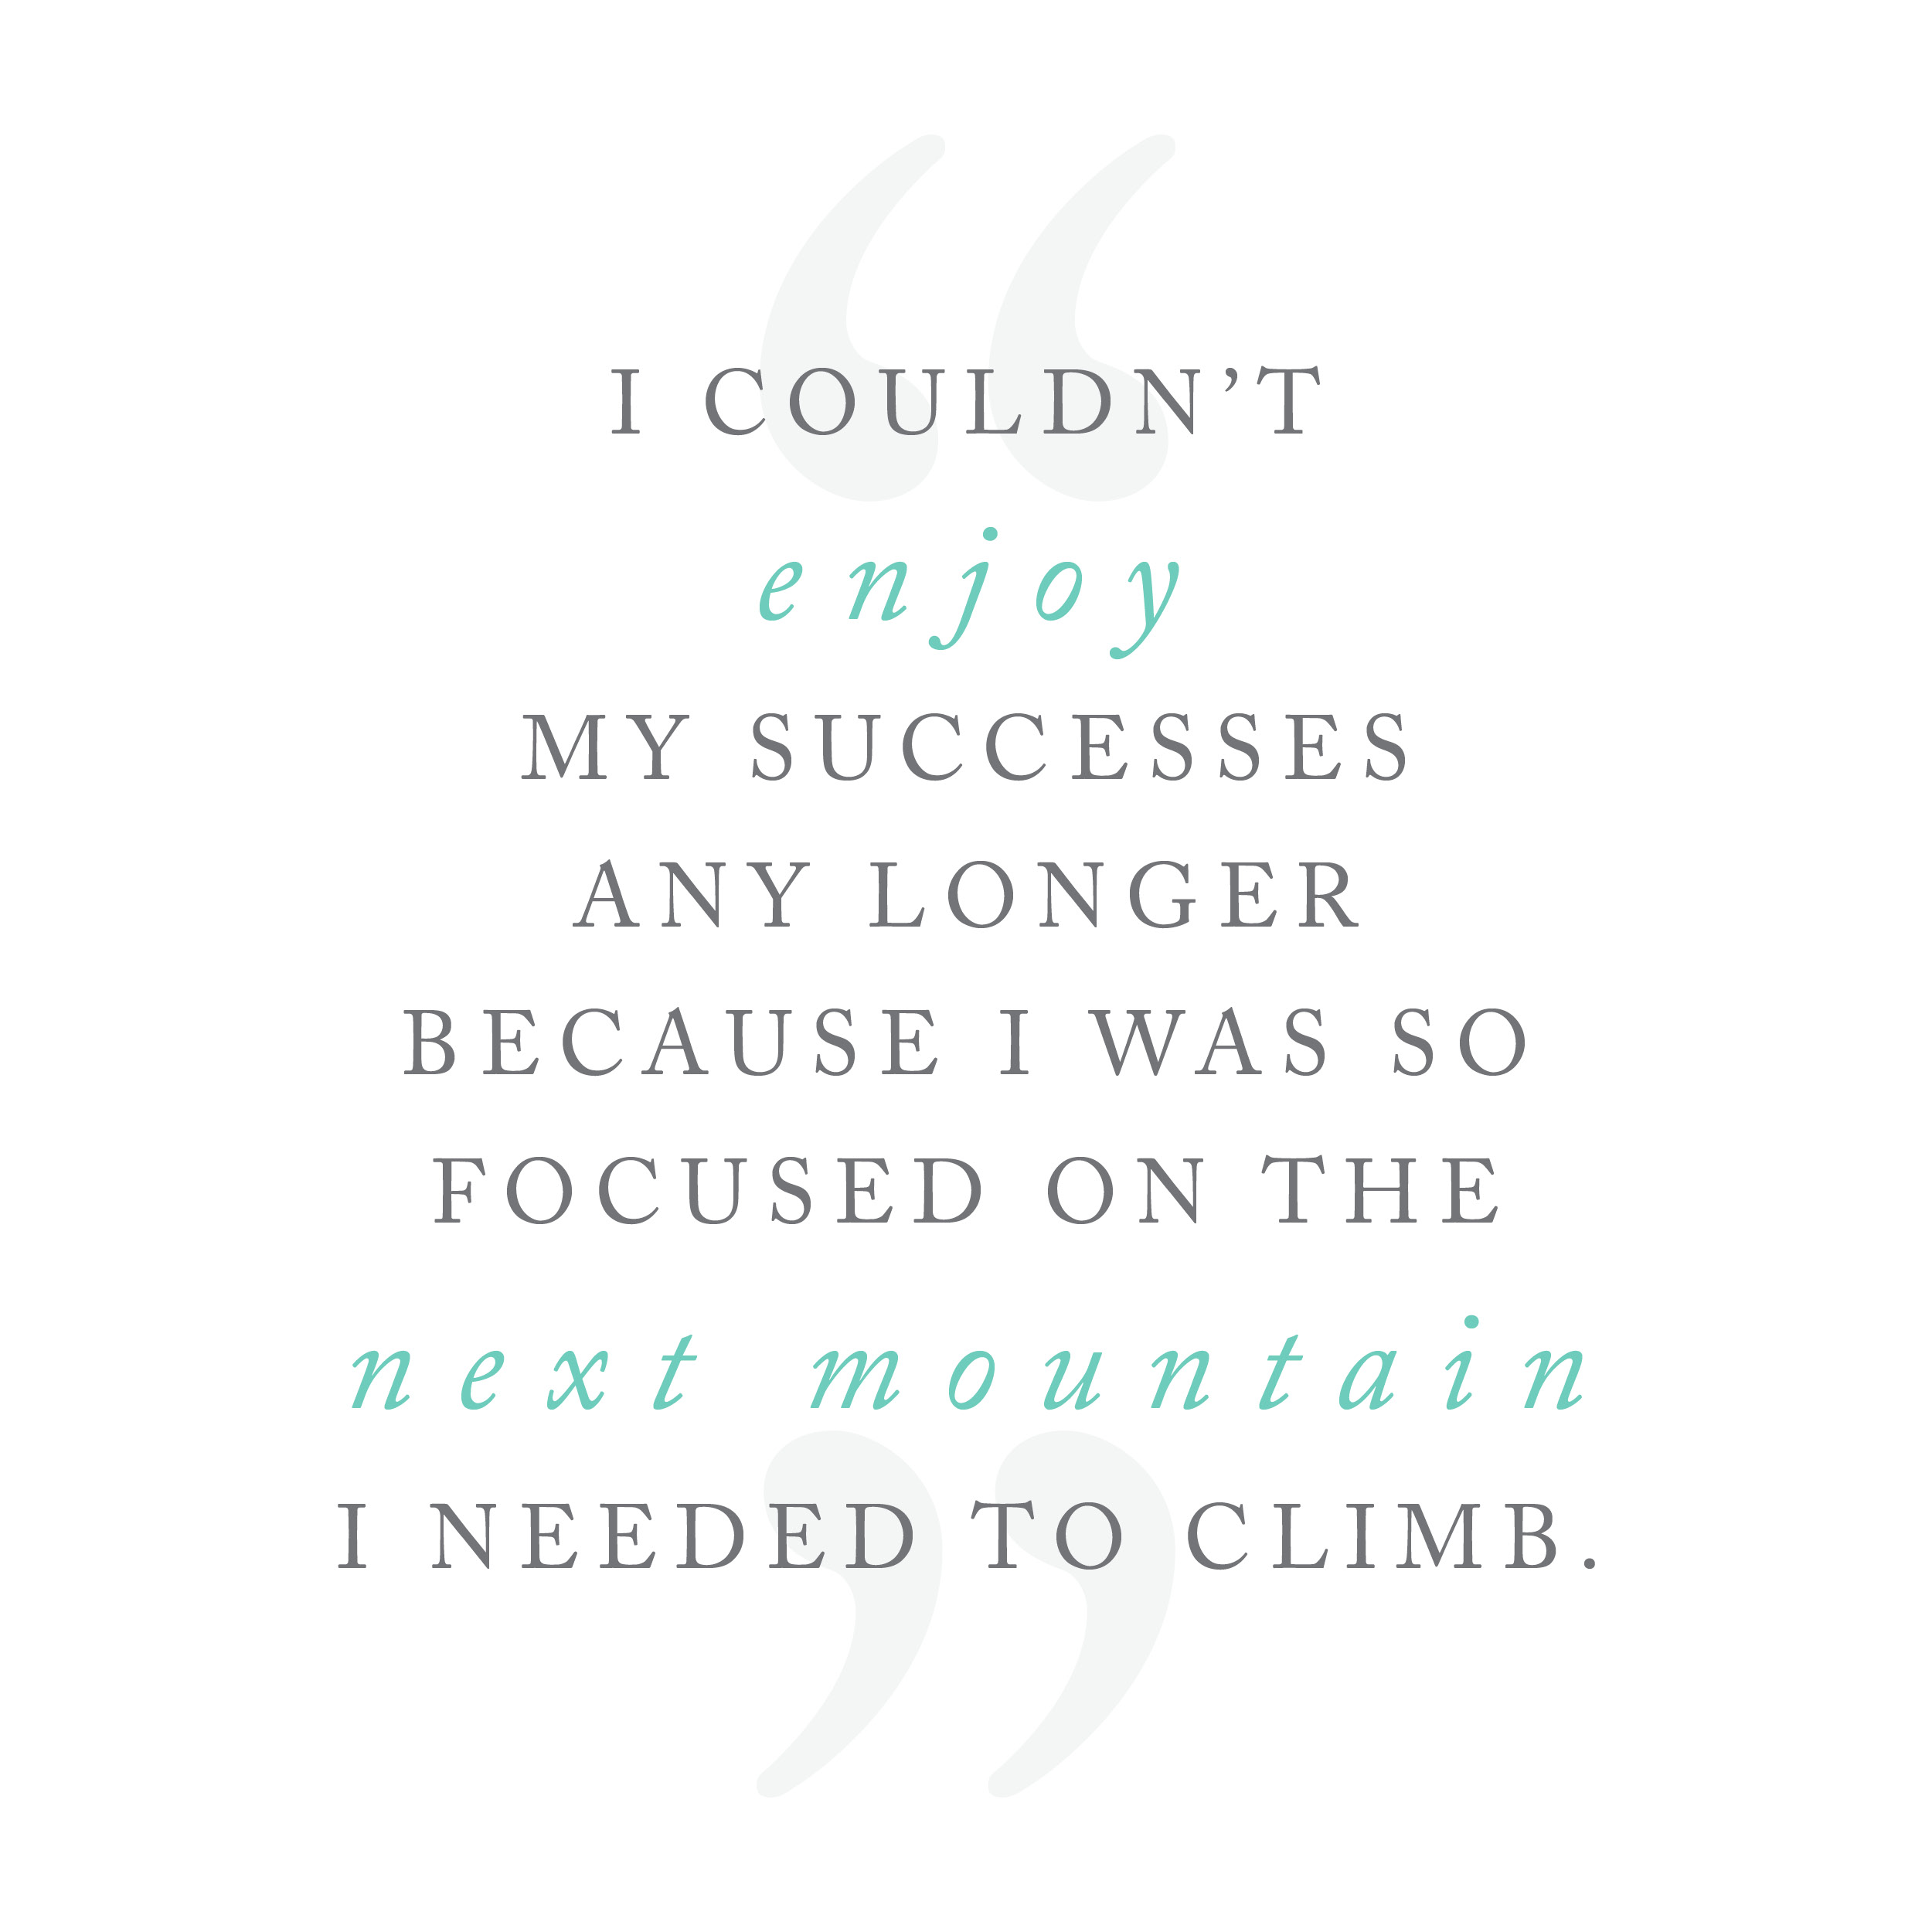 I couldn't enjoy my successes any longer because I was so focused on the next mountain I had to climb